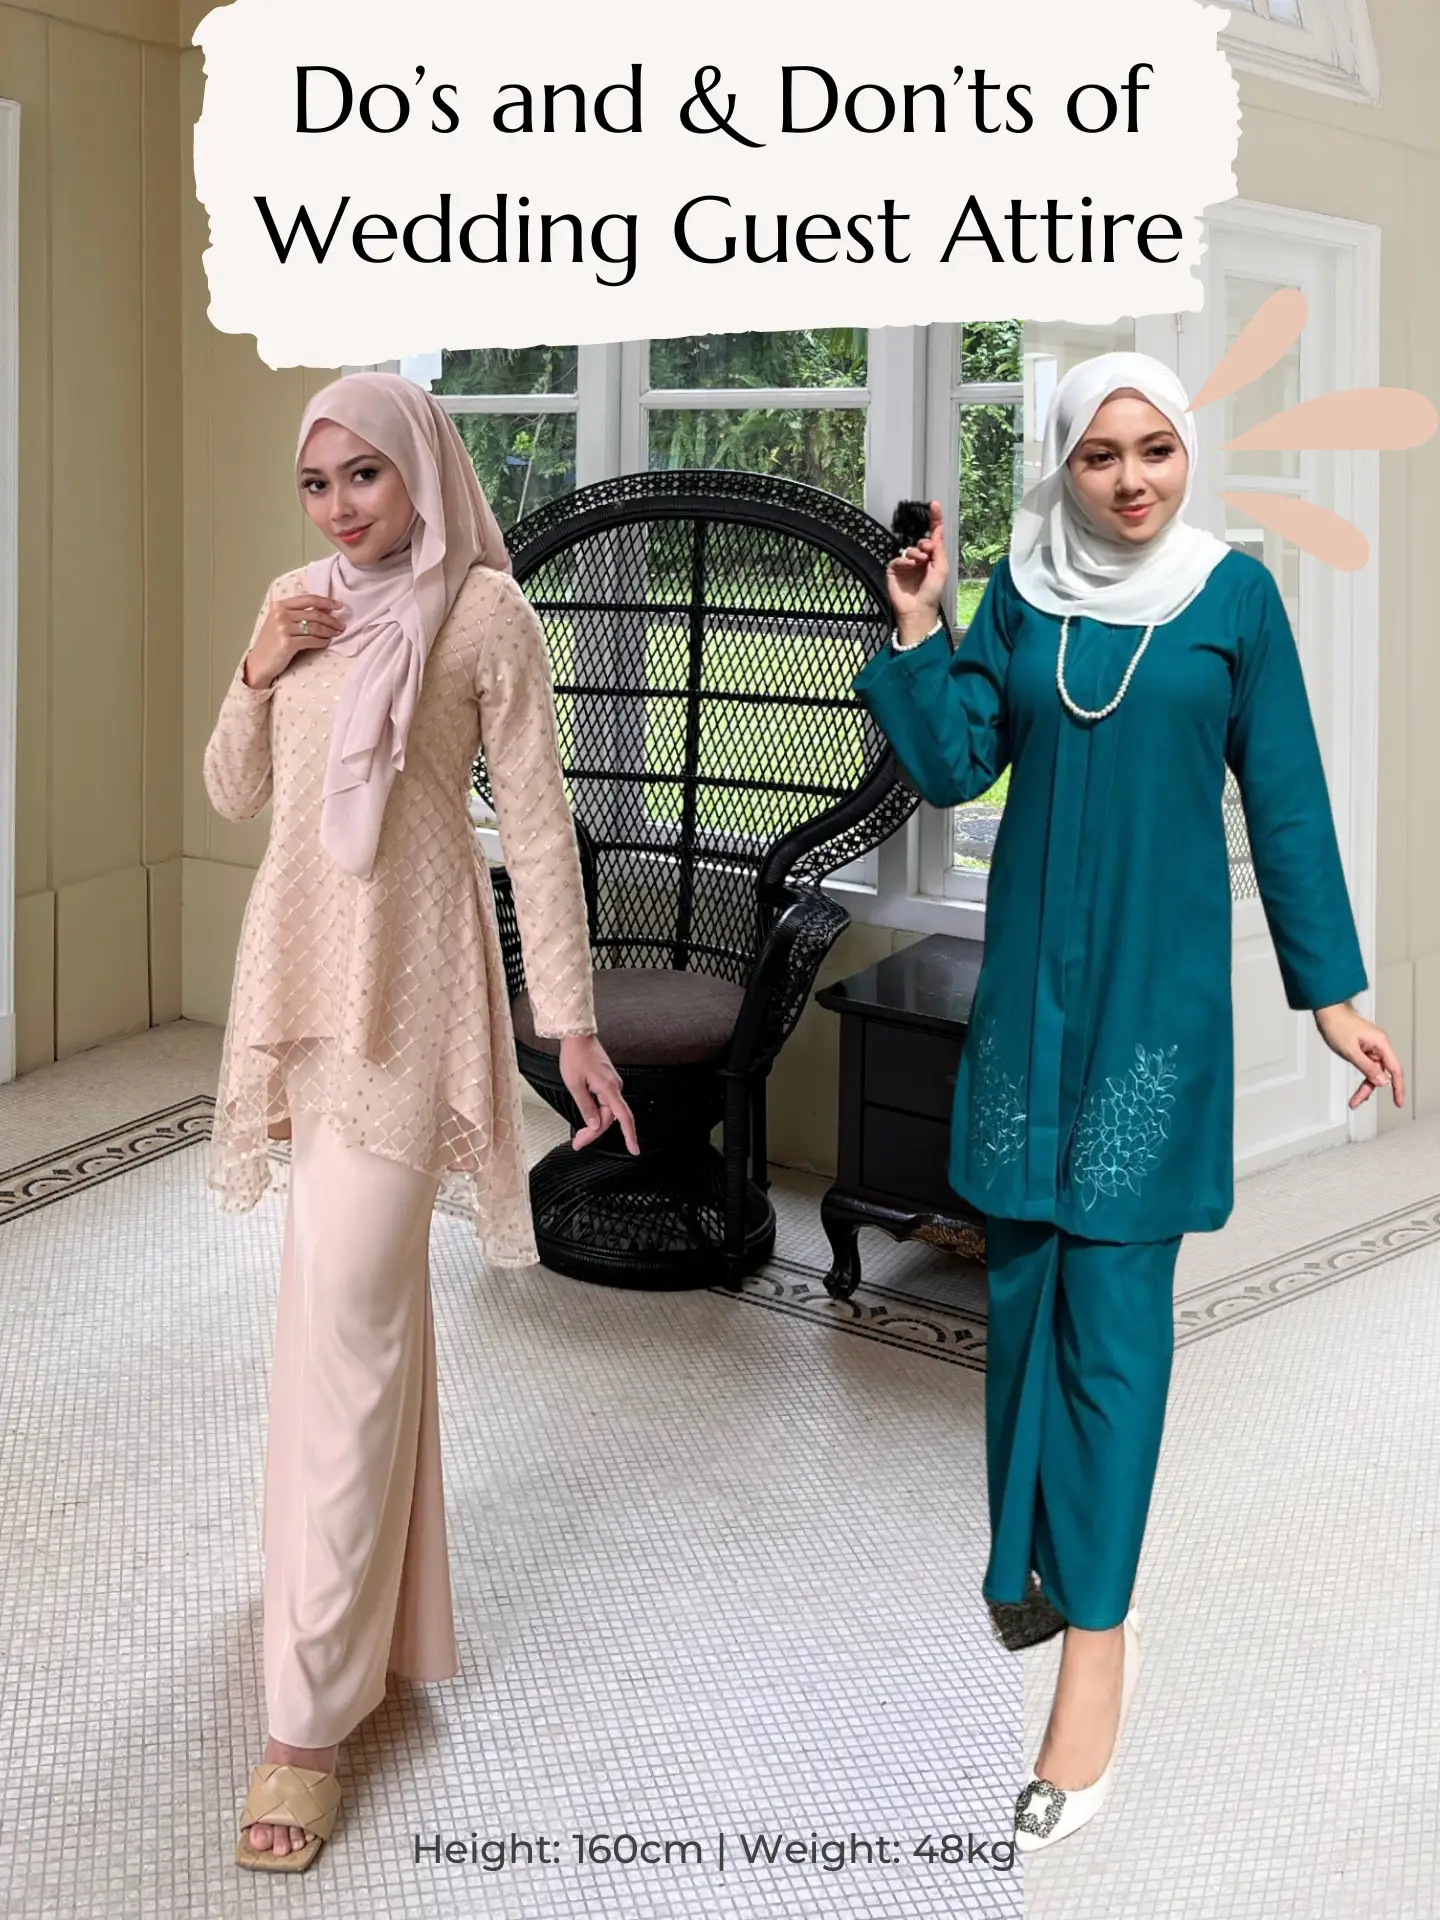 Do's and Don'ts of Wedding Guest Attire